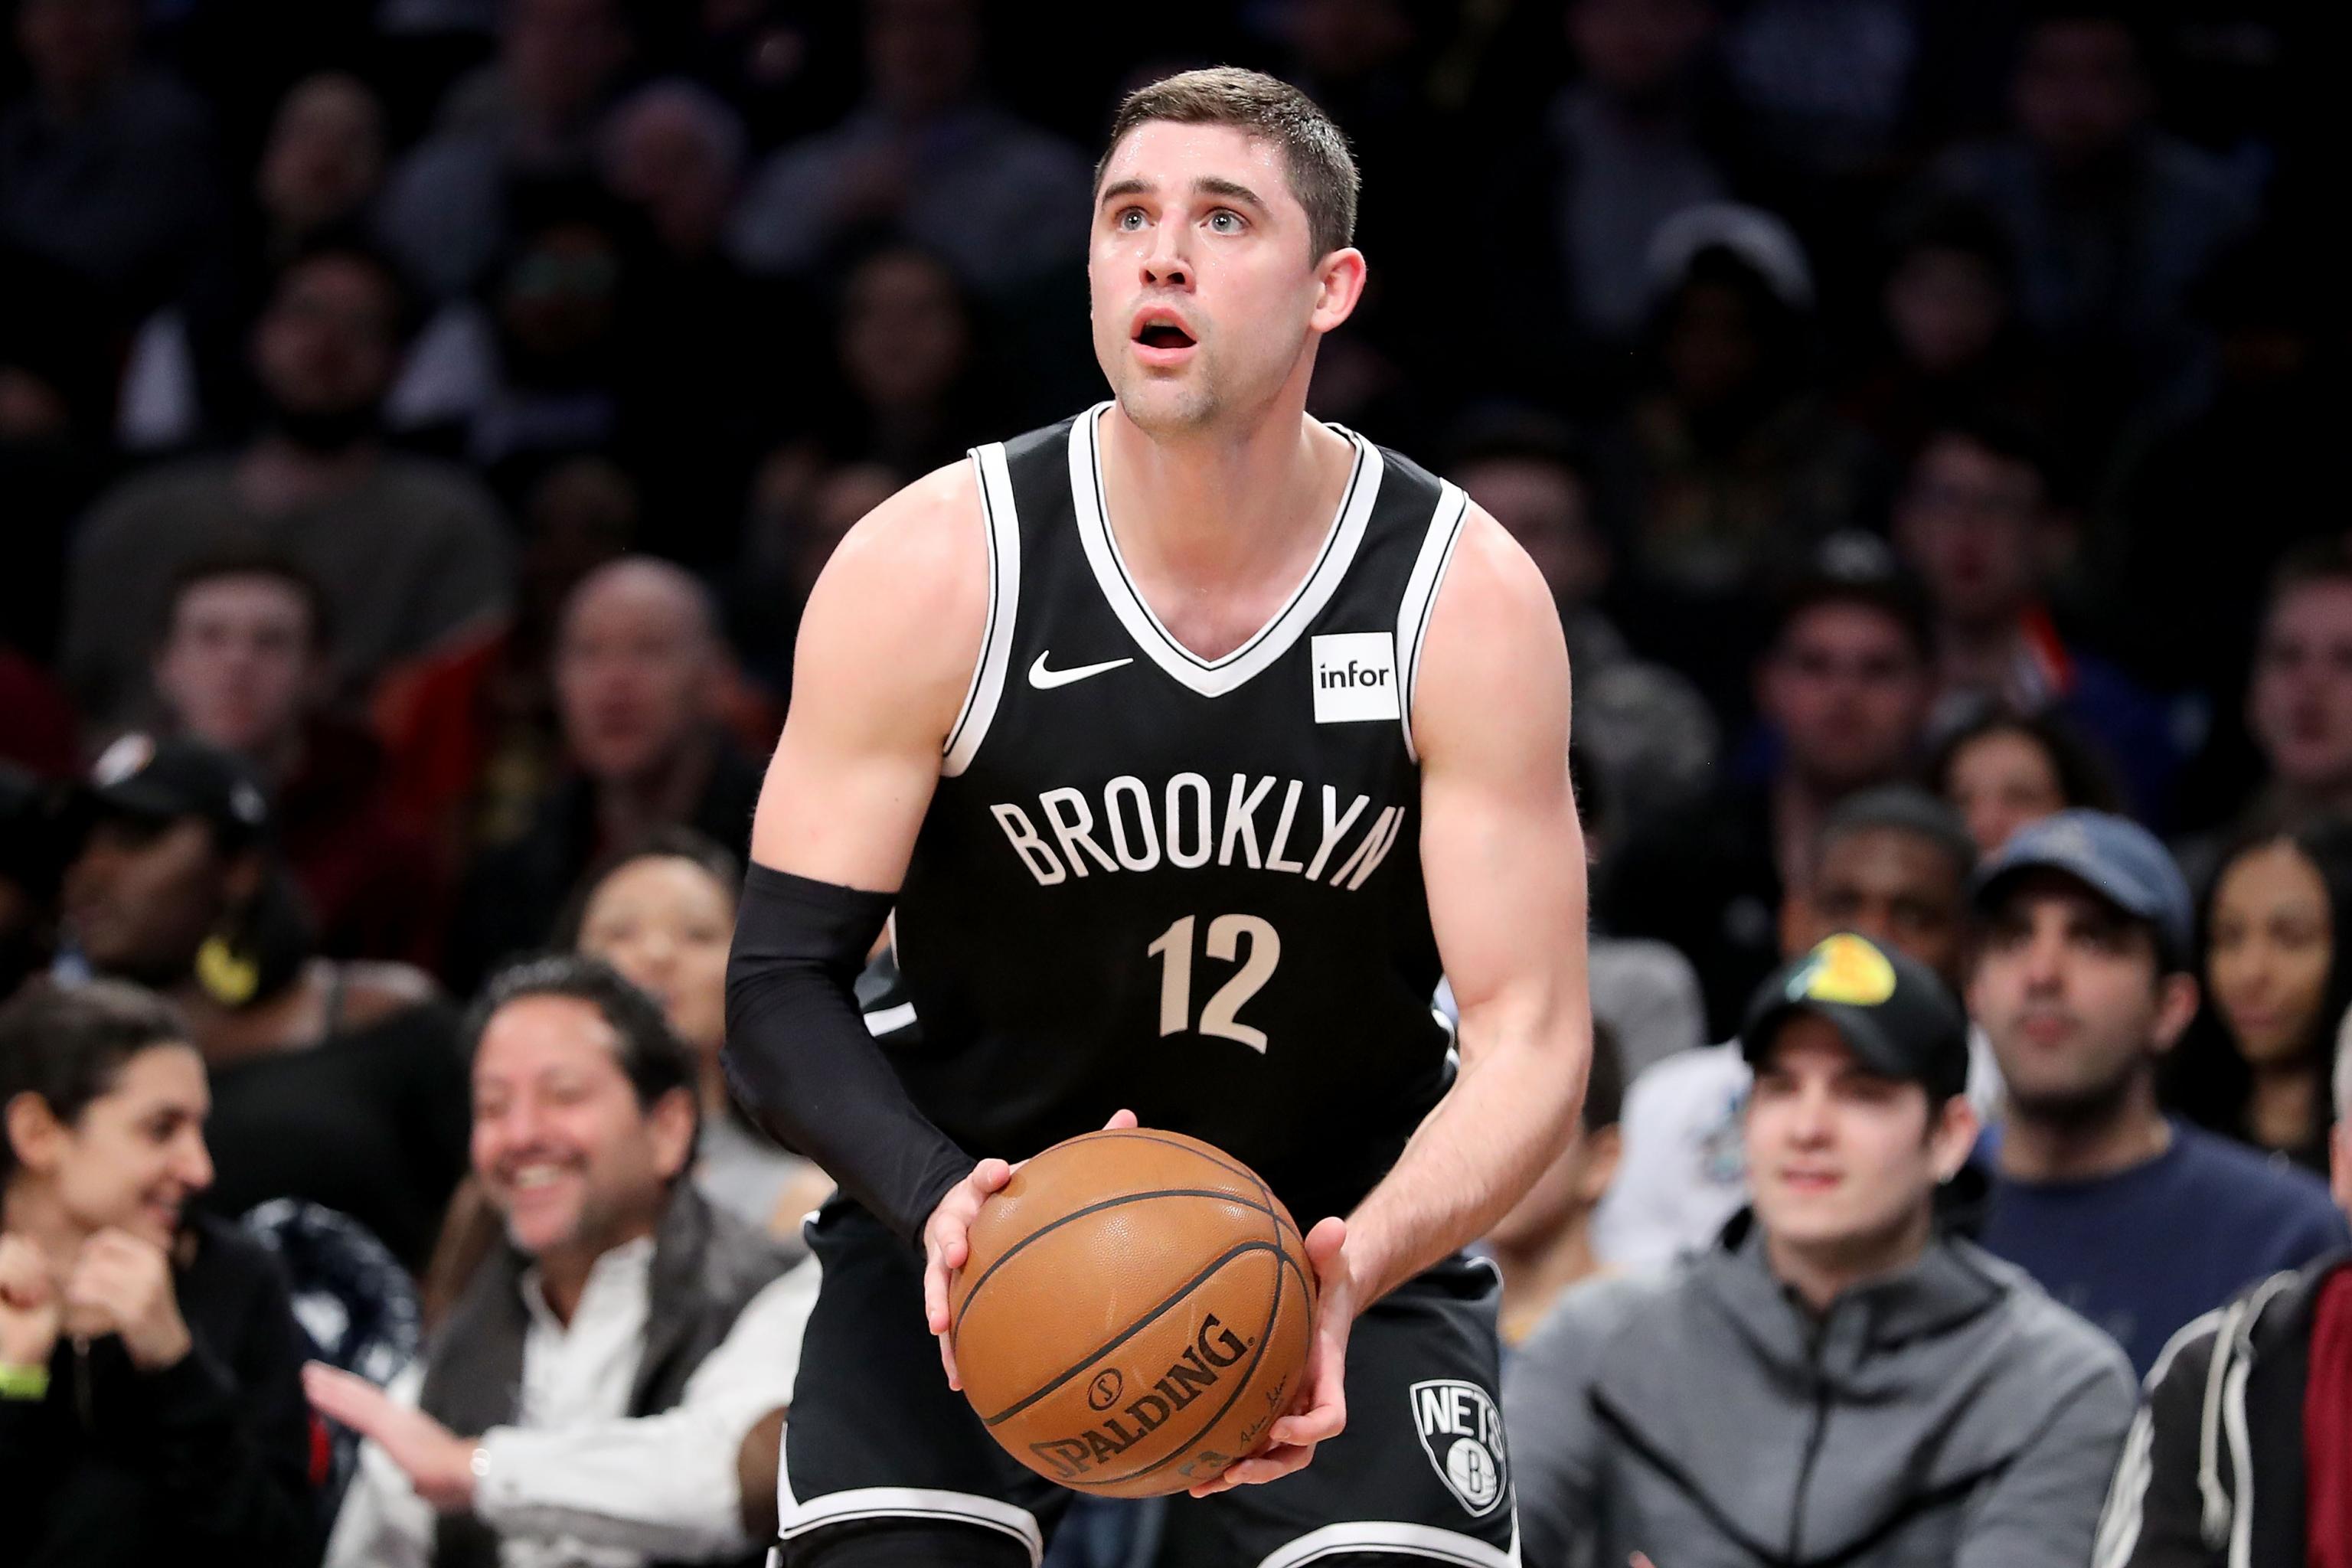 Joe Harris: “I'm disappointed. I wish that I had played better - it's  definitely going to be a motivating factor going into the offseason.”